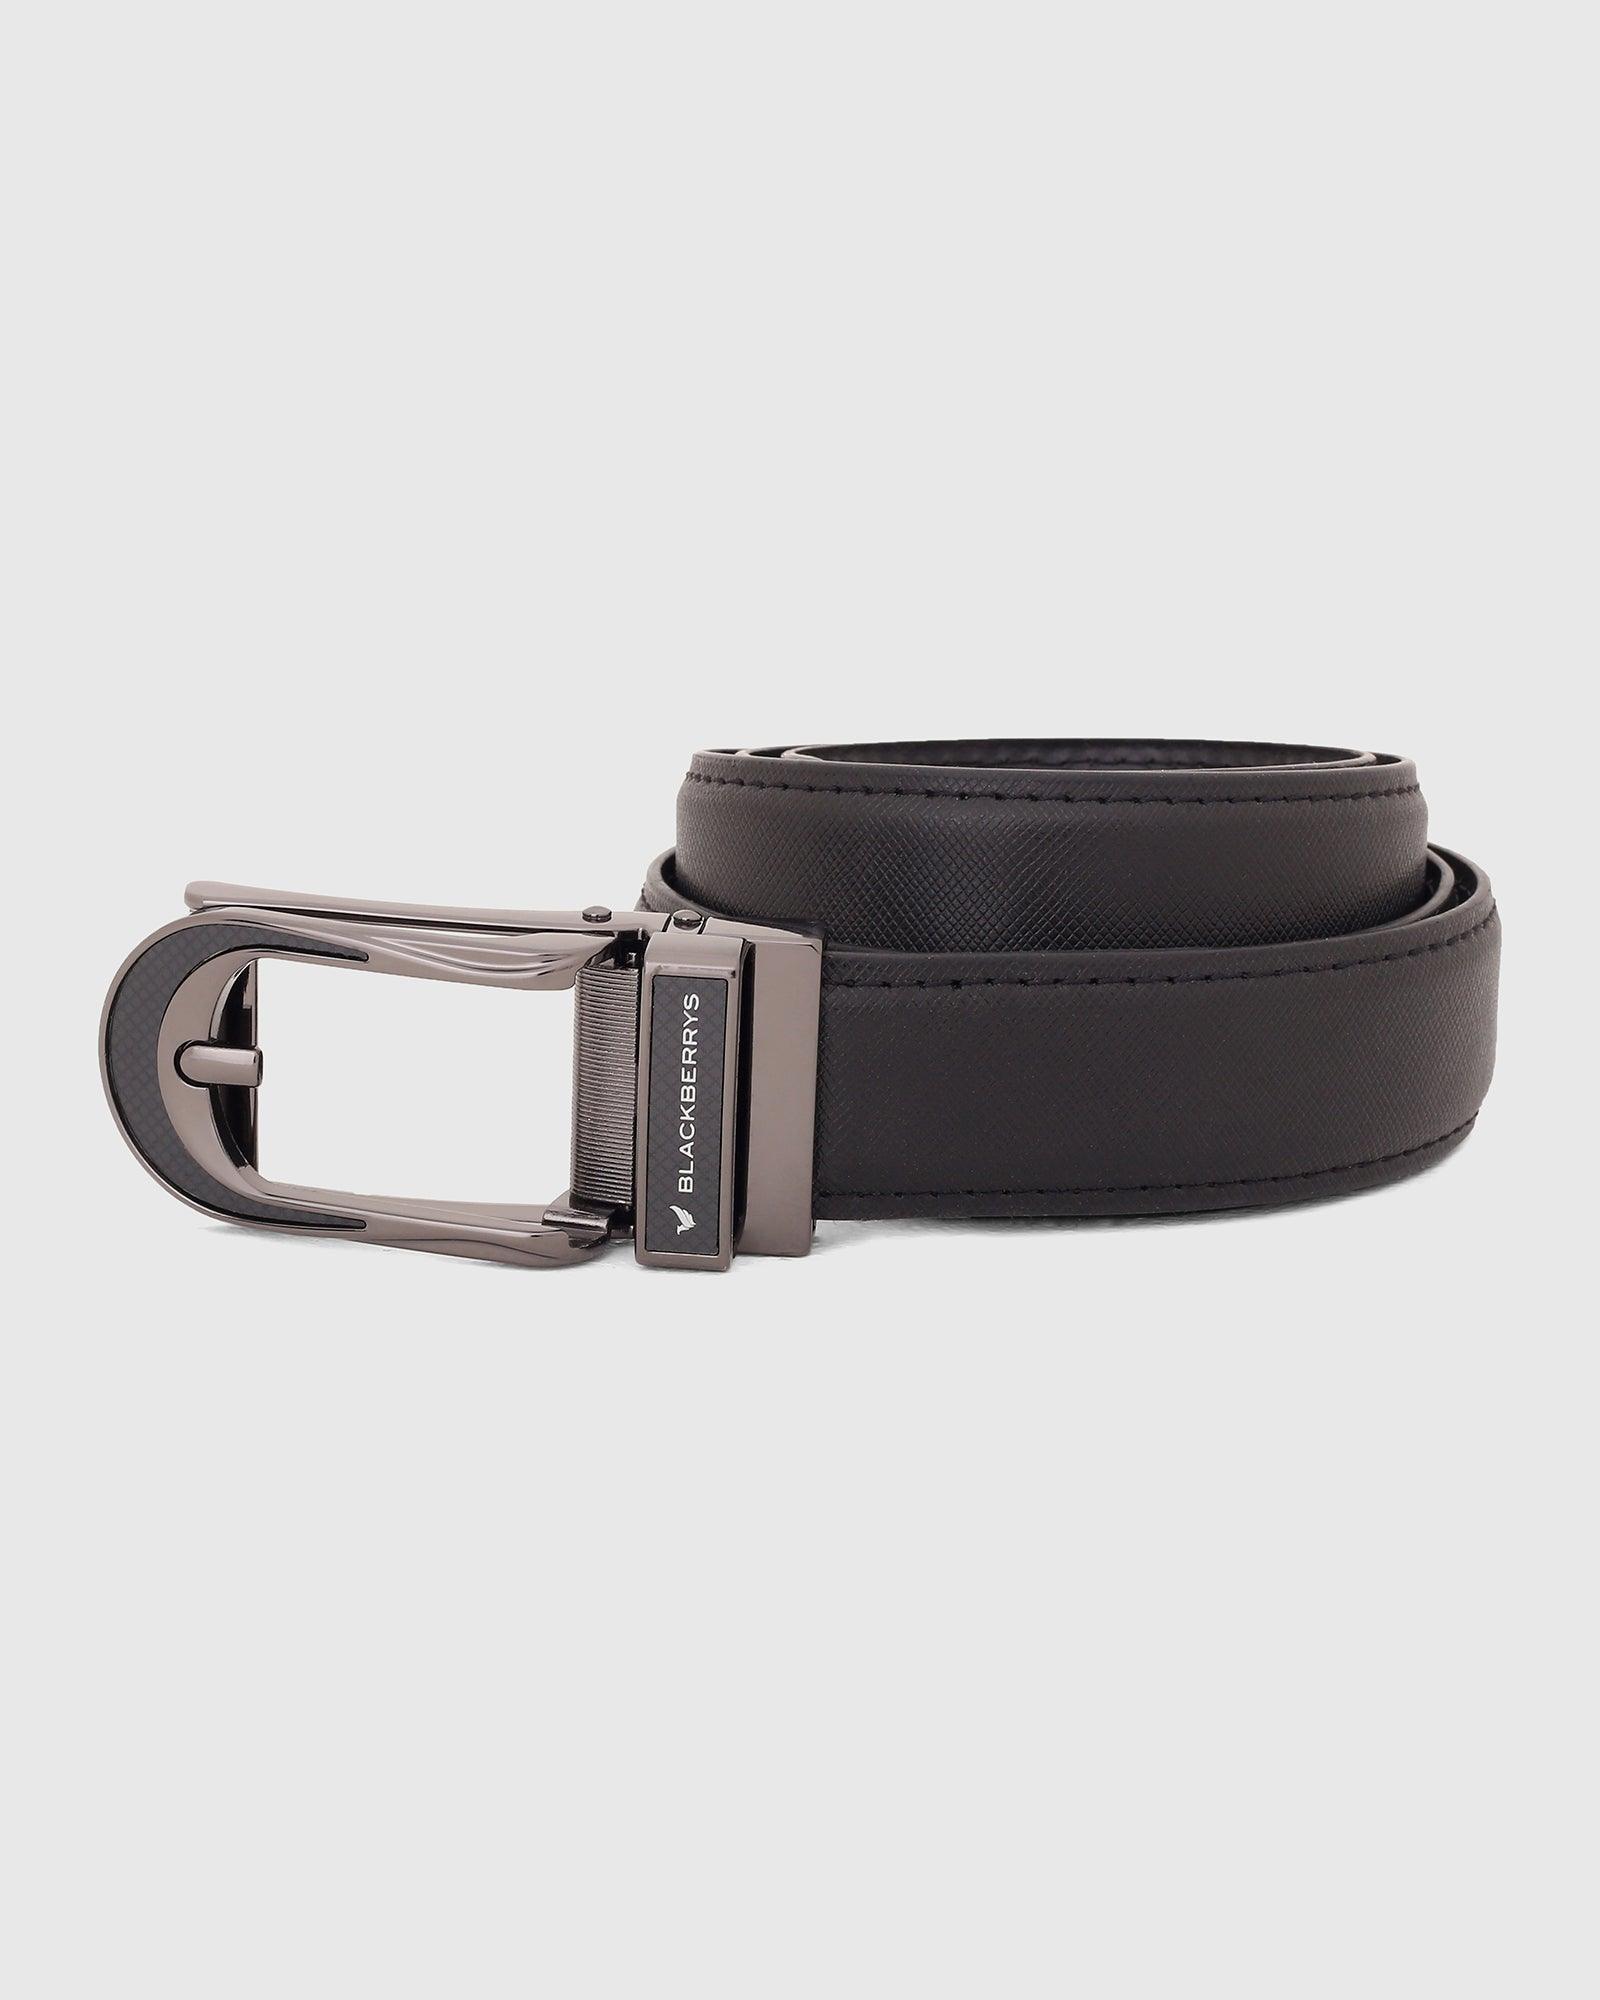 Must Haves Leather Black Textured Belt - New Galenia